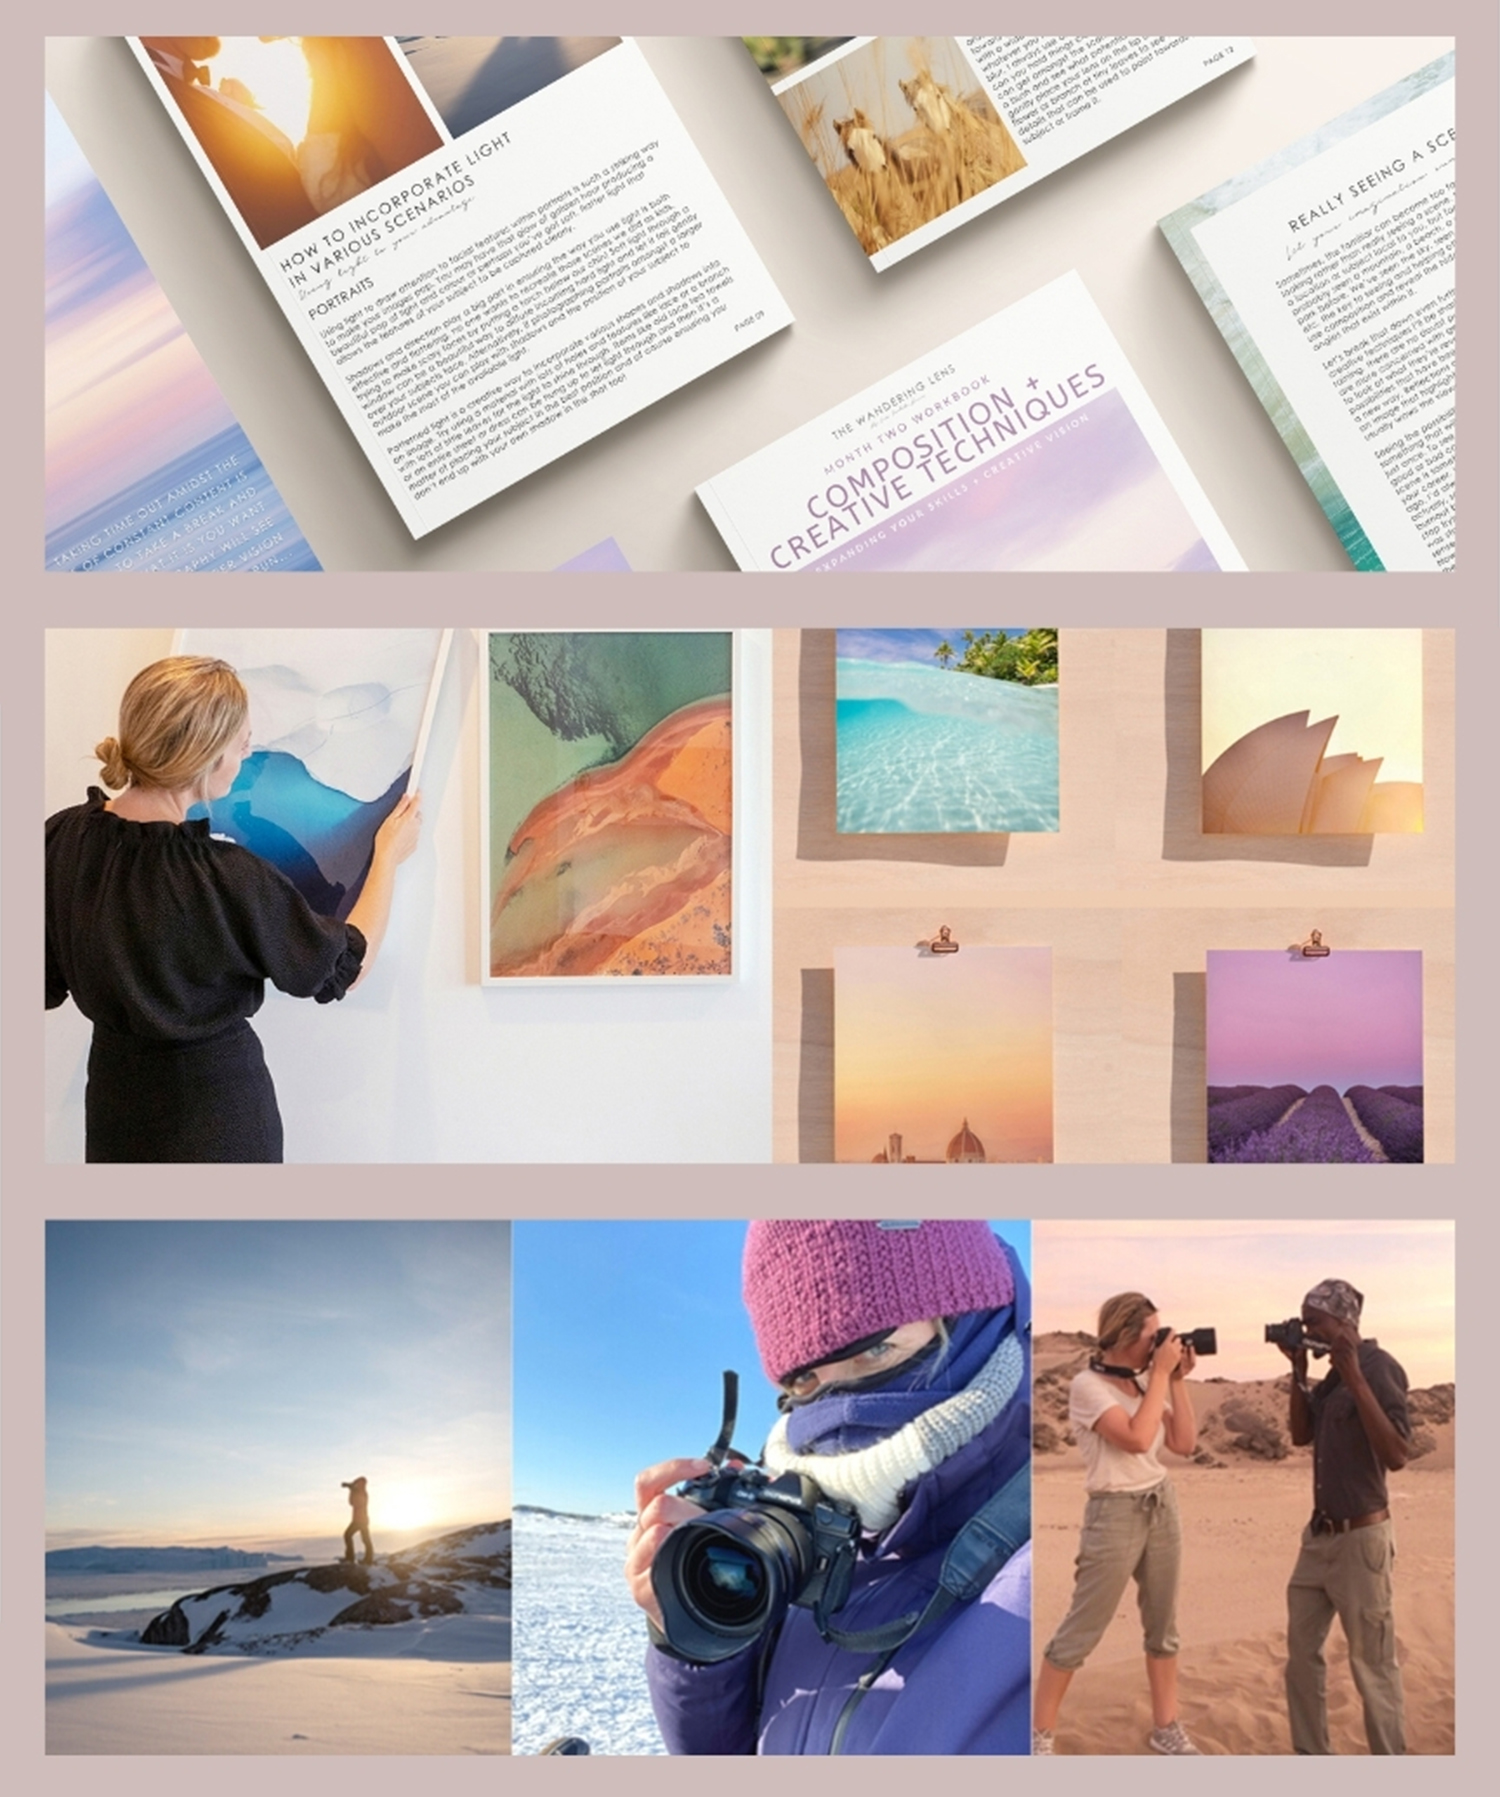 Online photography courses and learning materials like ebooks for photographers